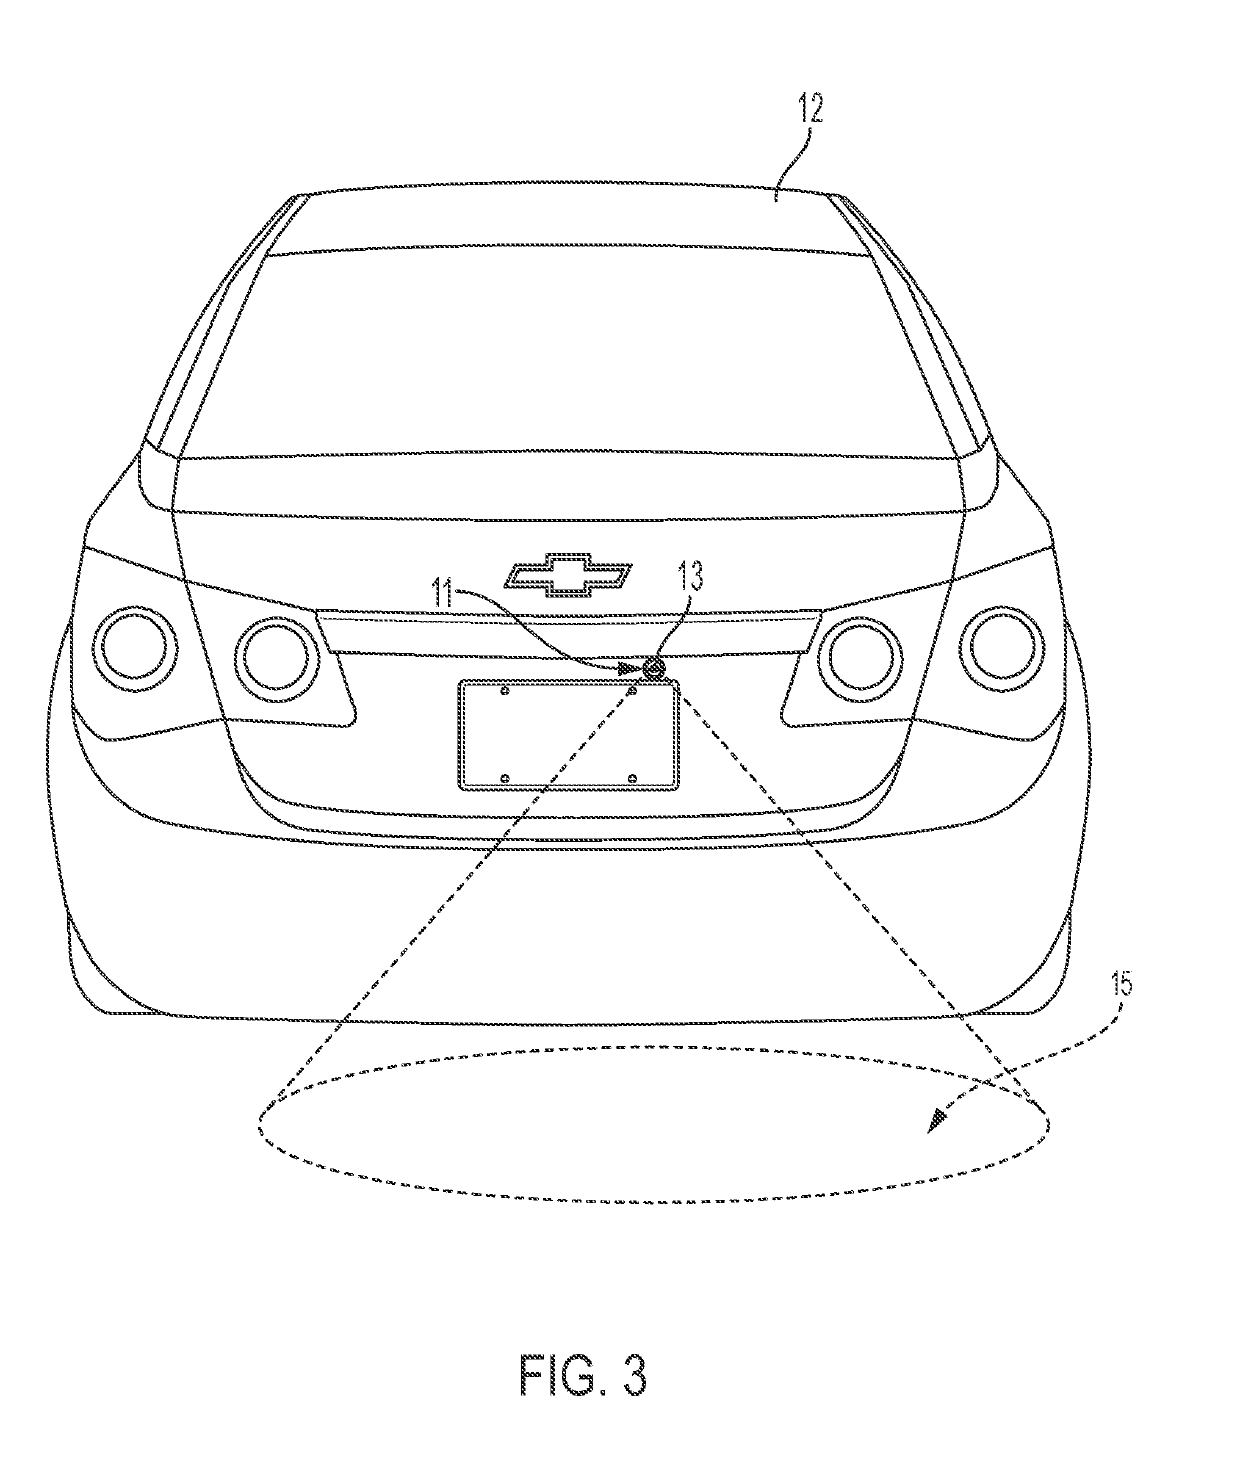 System and method to identify backup camera vision impairment